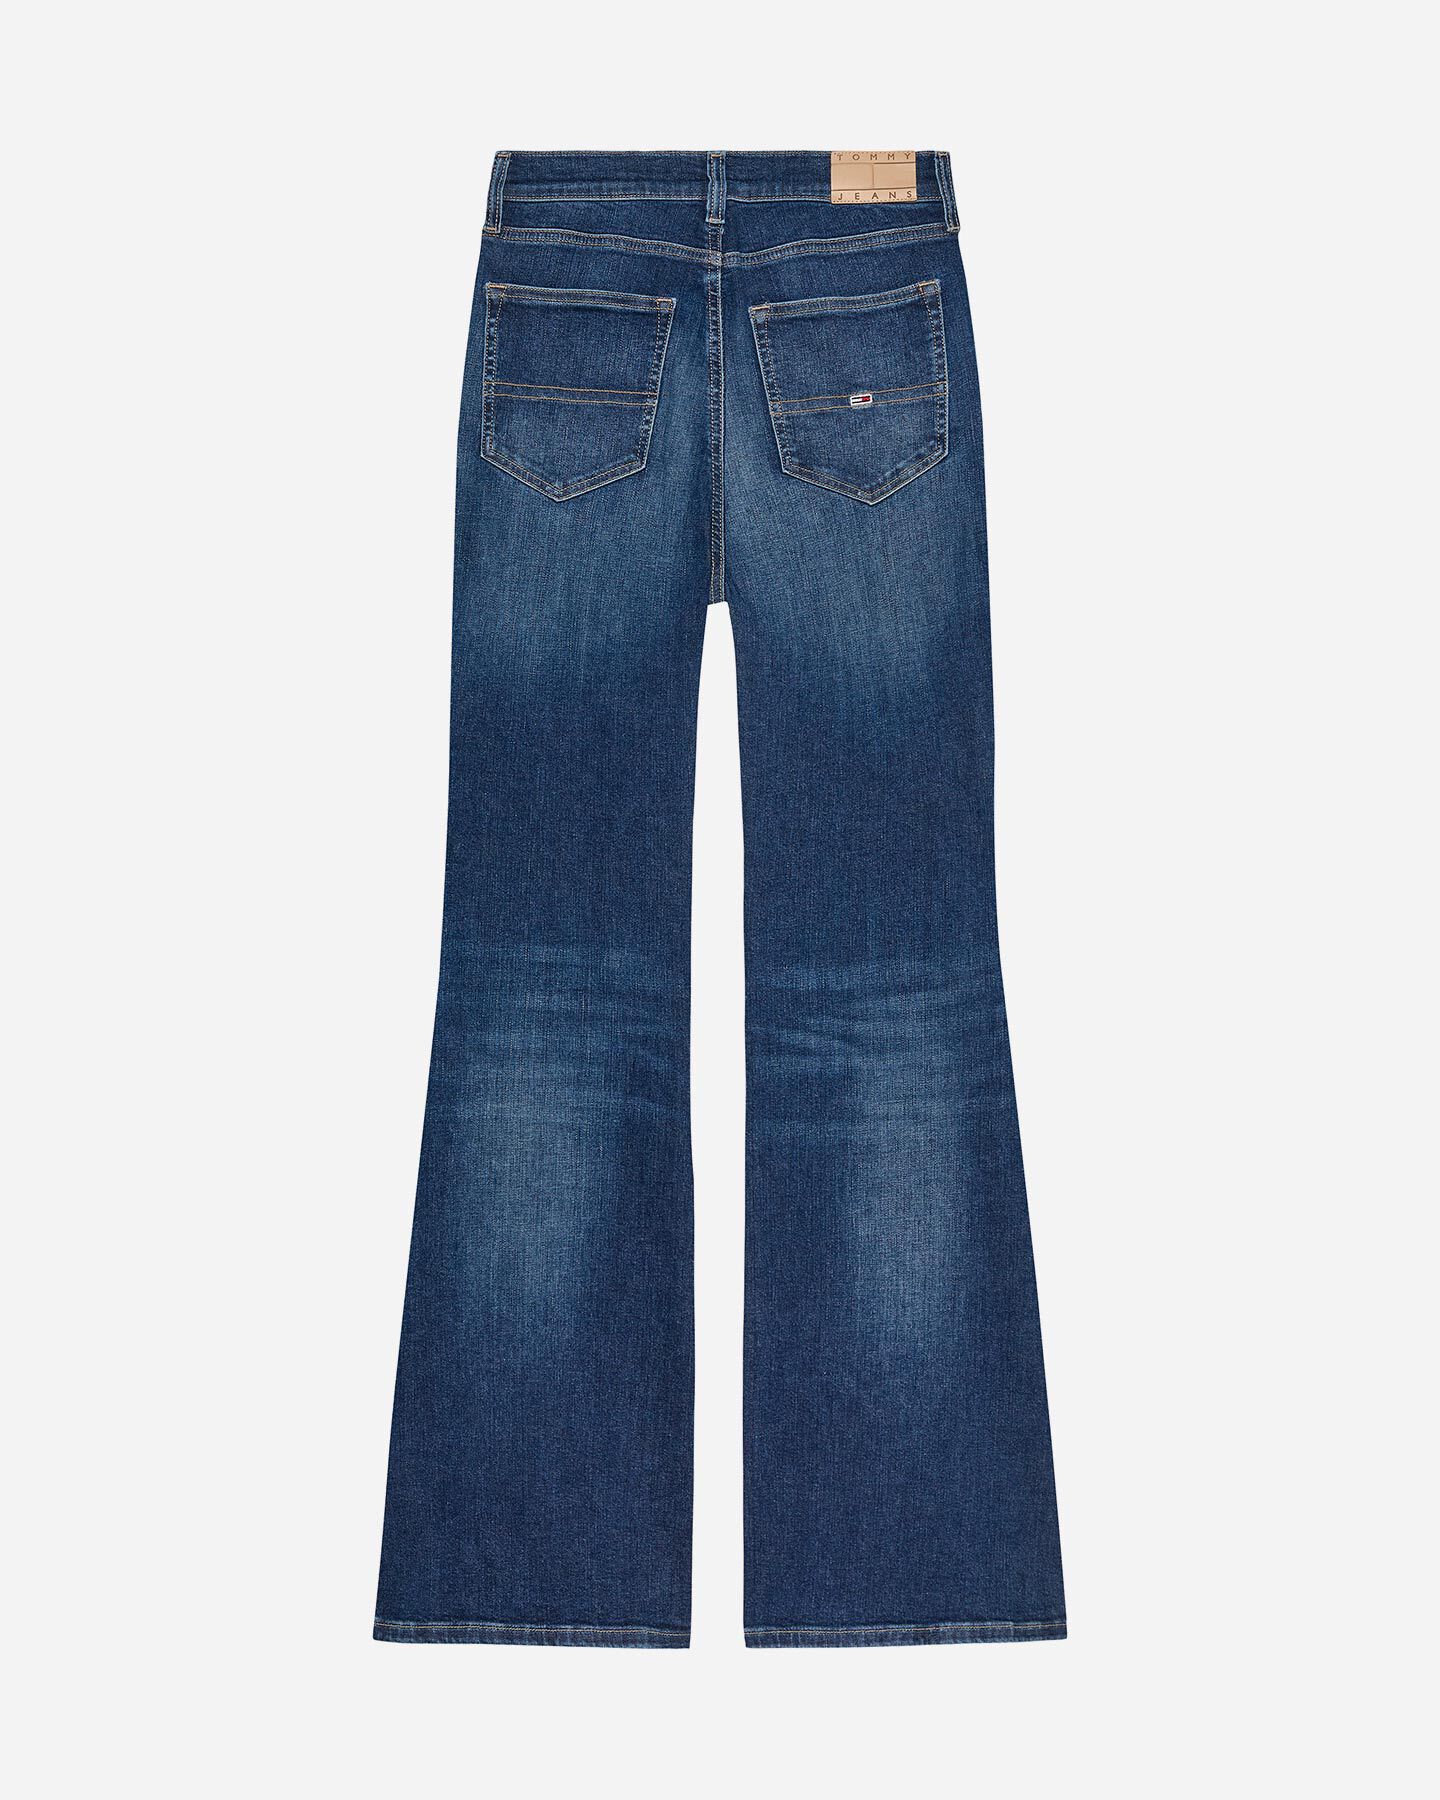  Jeans TOMMY HILFIGER SYLVIA L32 BOOTCUT W S5686211|UNI|32/28 scatto 1